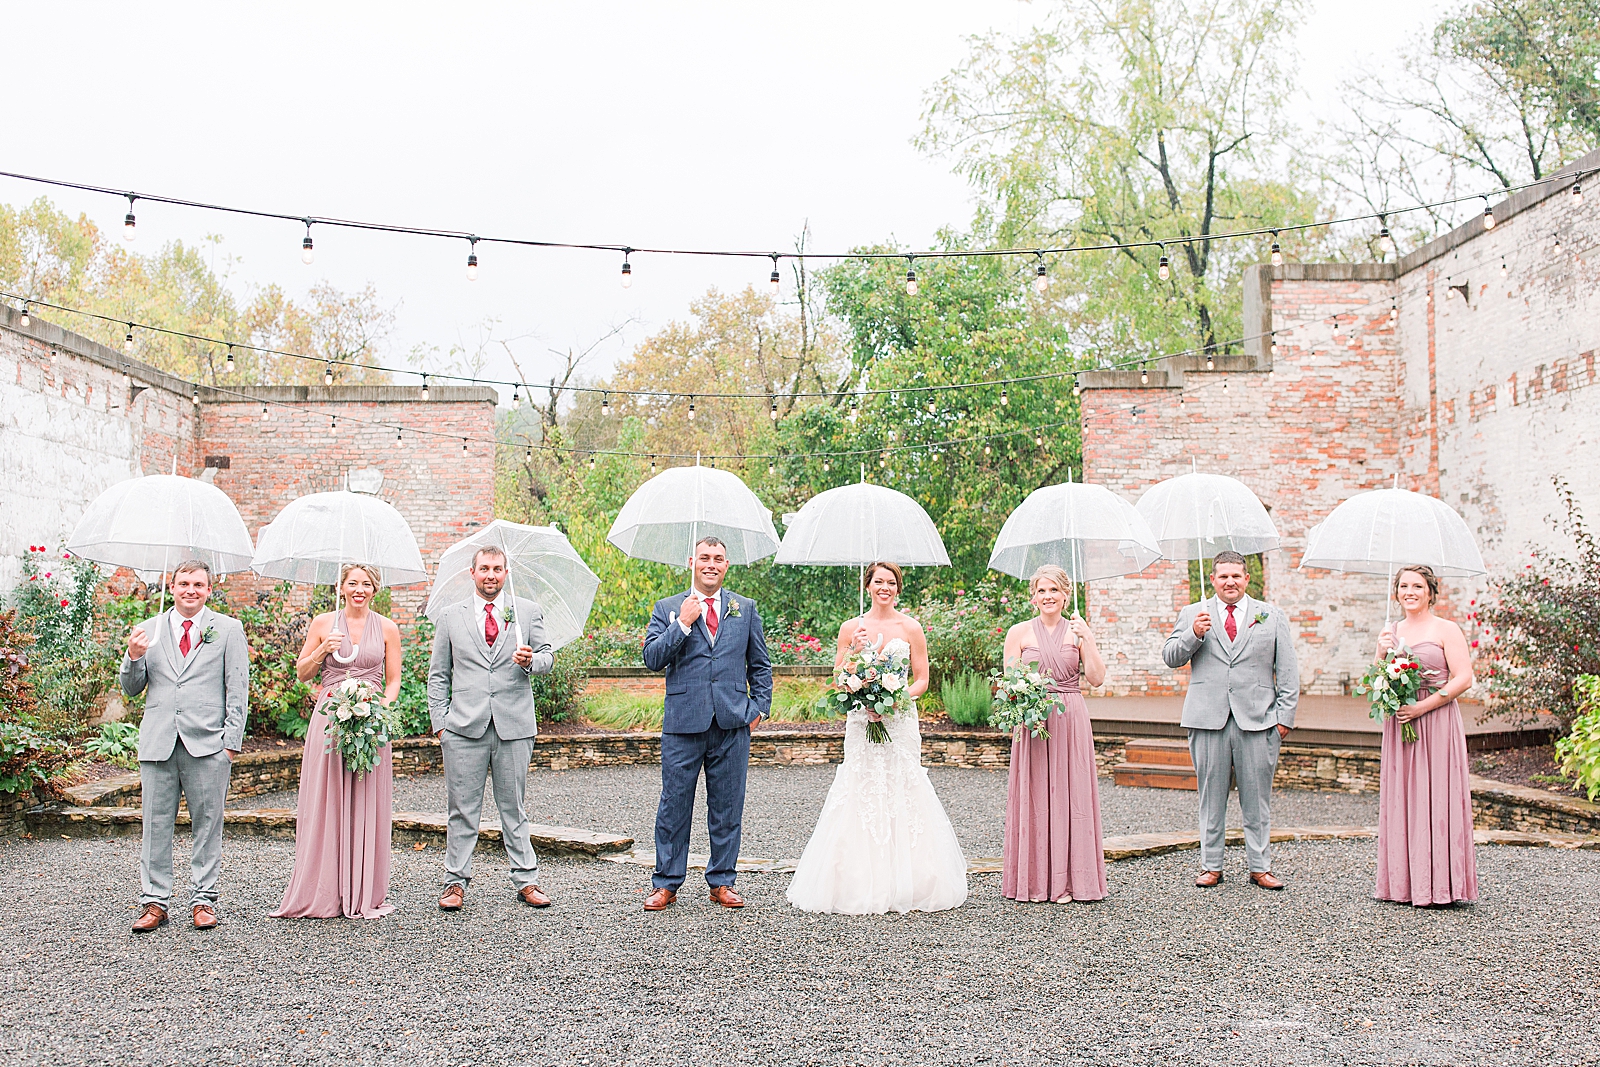 The Hackney Warehouse Bridal Party with Umbrellas In The Rain Photo